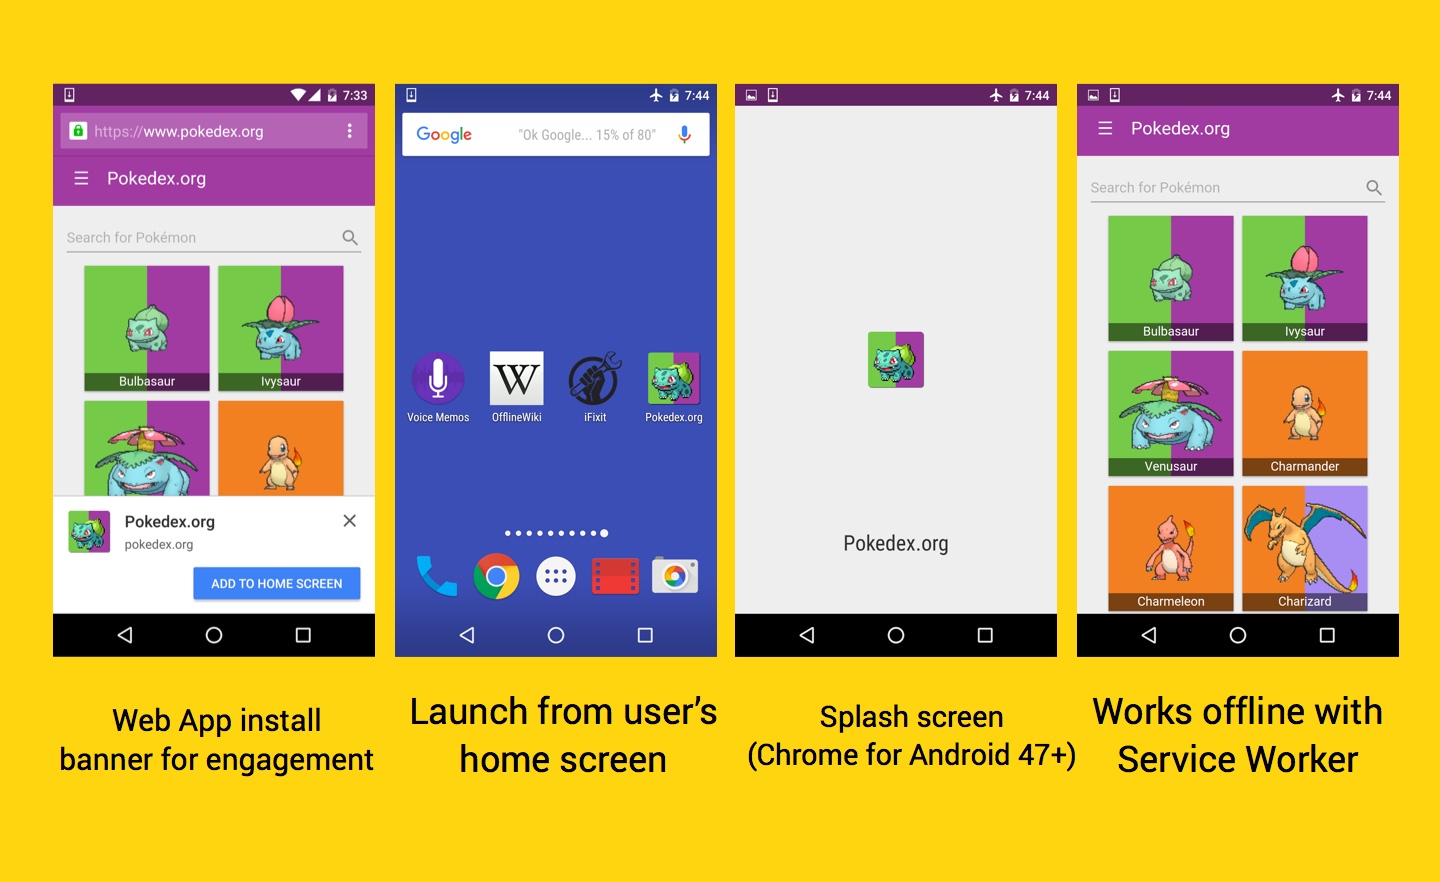 Web app install banners for engagement, launch from the user's homescreen, splash screen in Chrome for Android, works offline with Service Worker